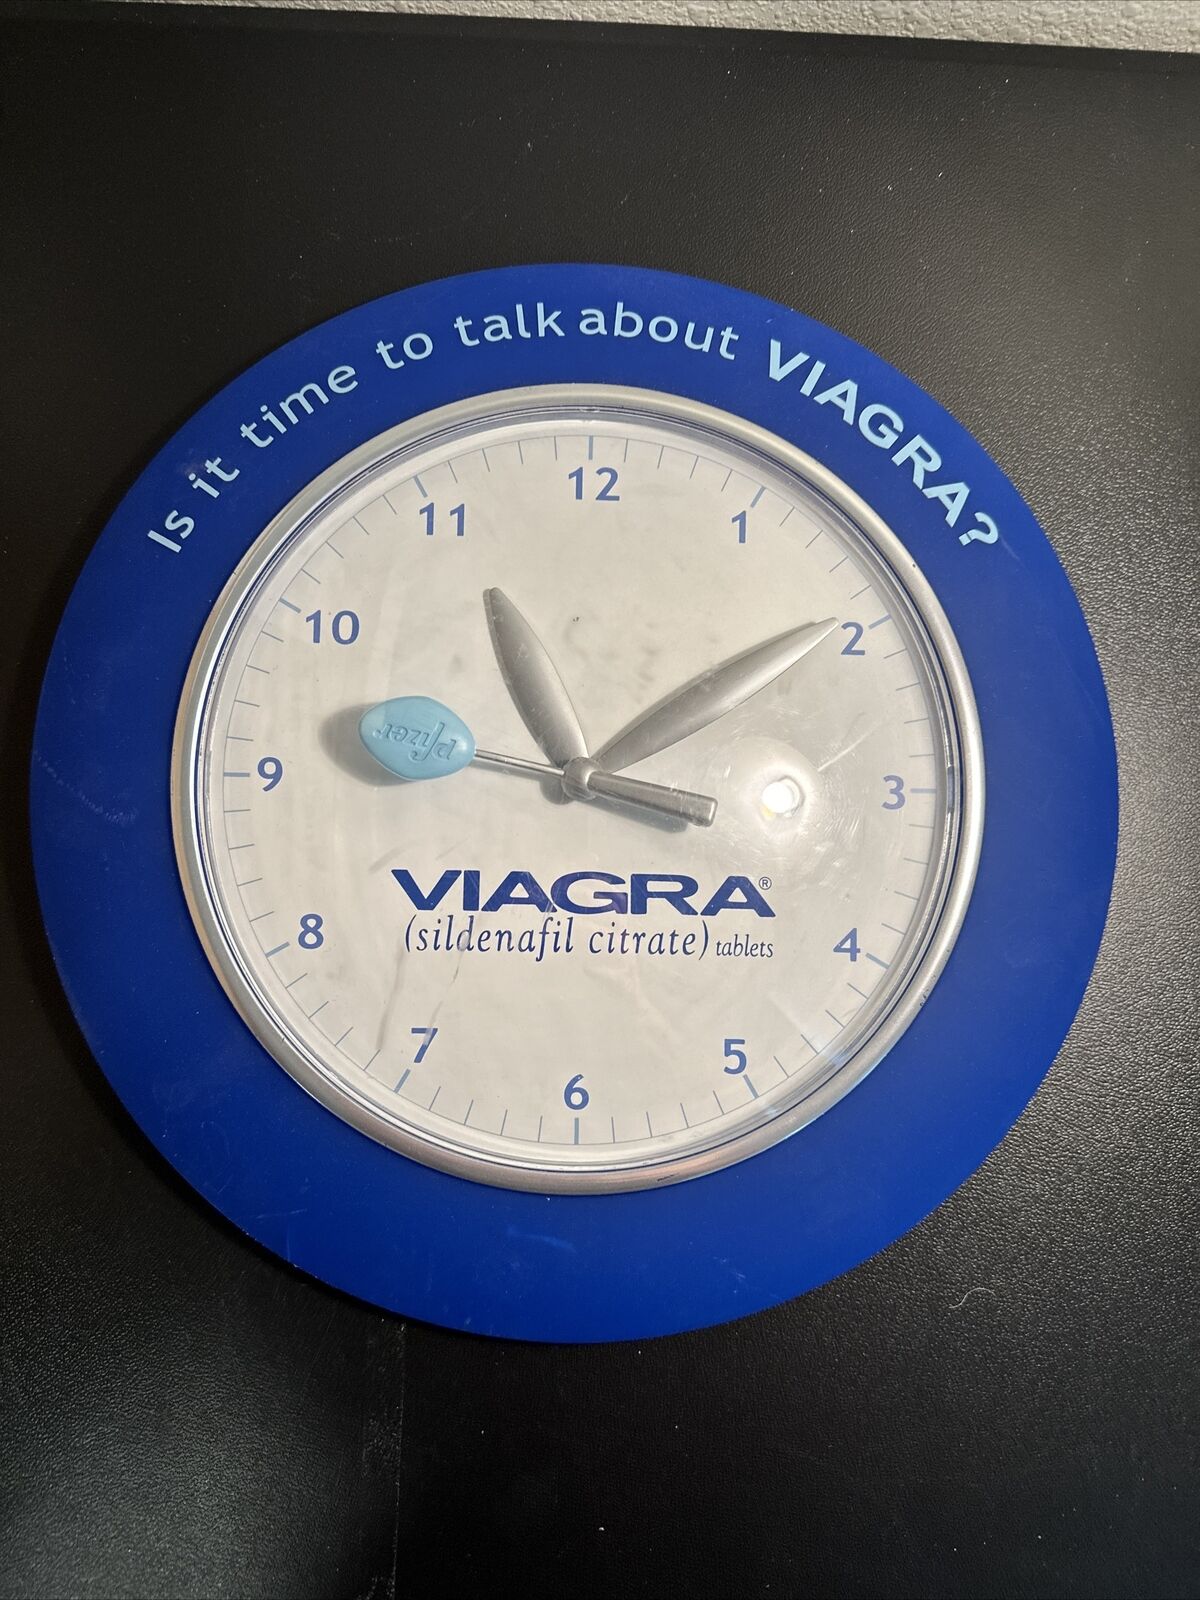 Pfizer Is It Time To Start Thinking About Viagra? 12 Inch Wall Clock Man Cave